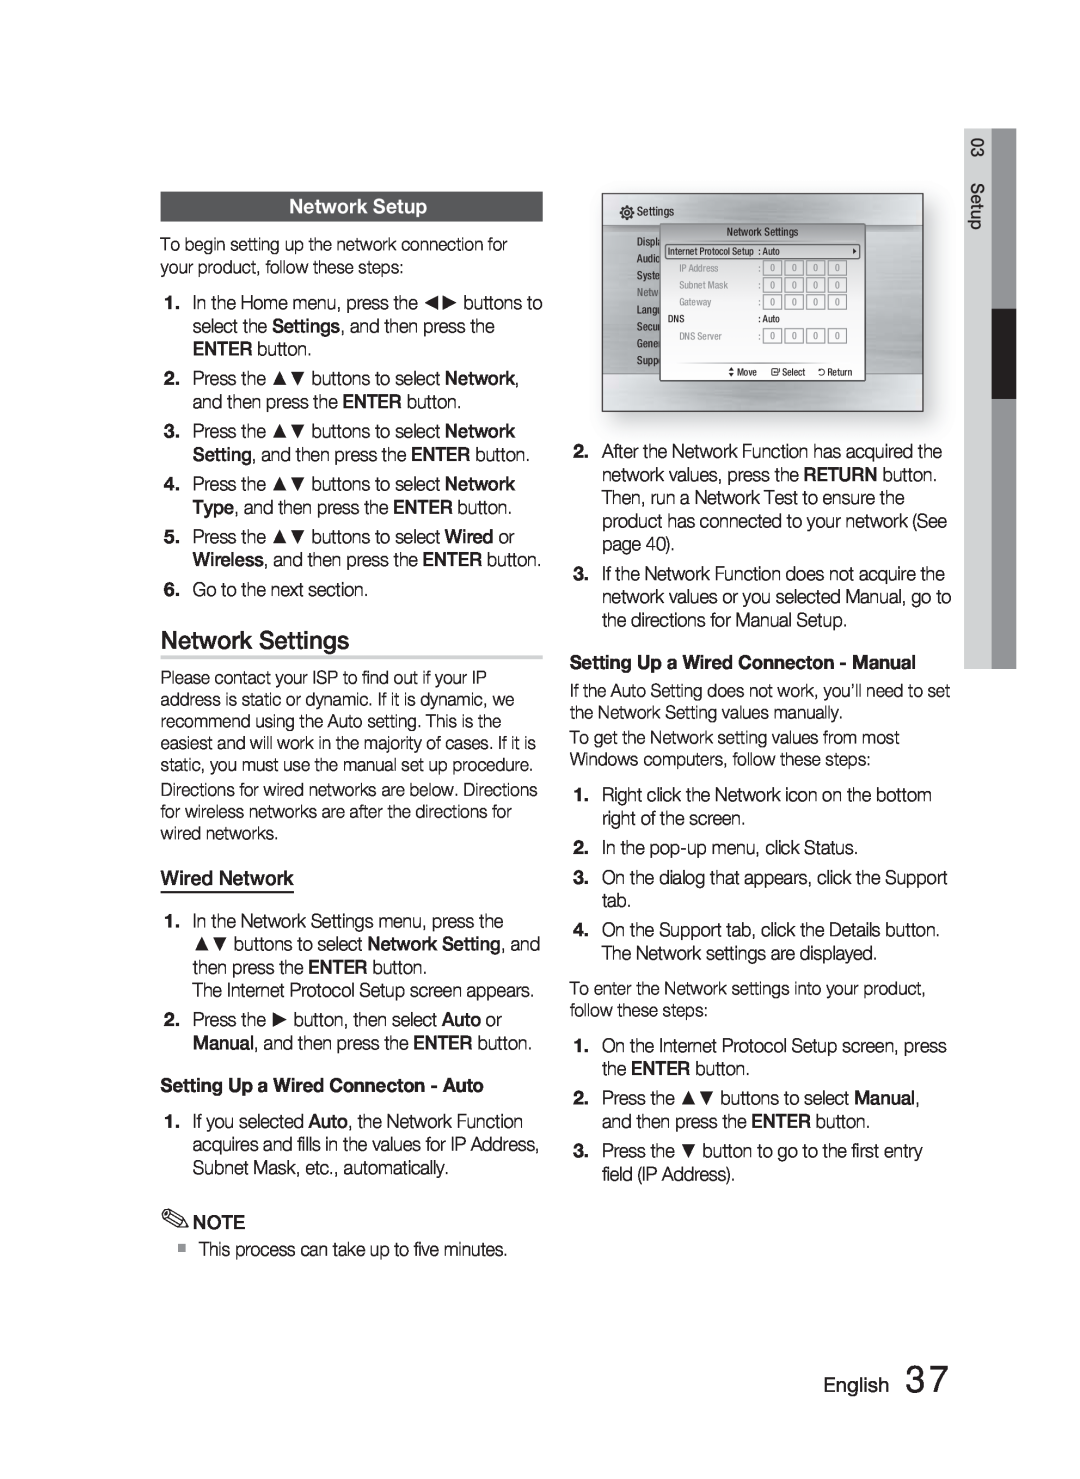 Samsung HT-C5500 user manual Network Settings, Network Setup, Wired Network, English 